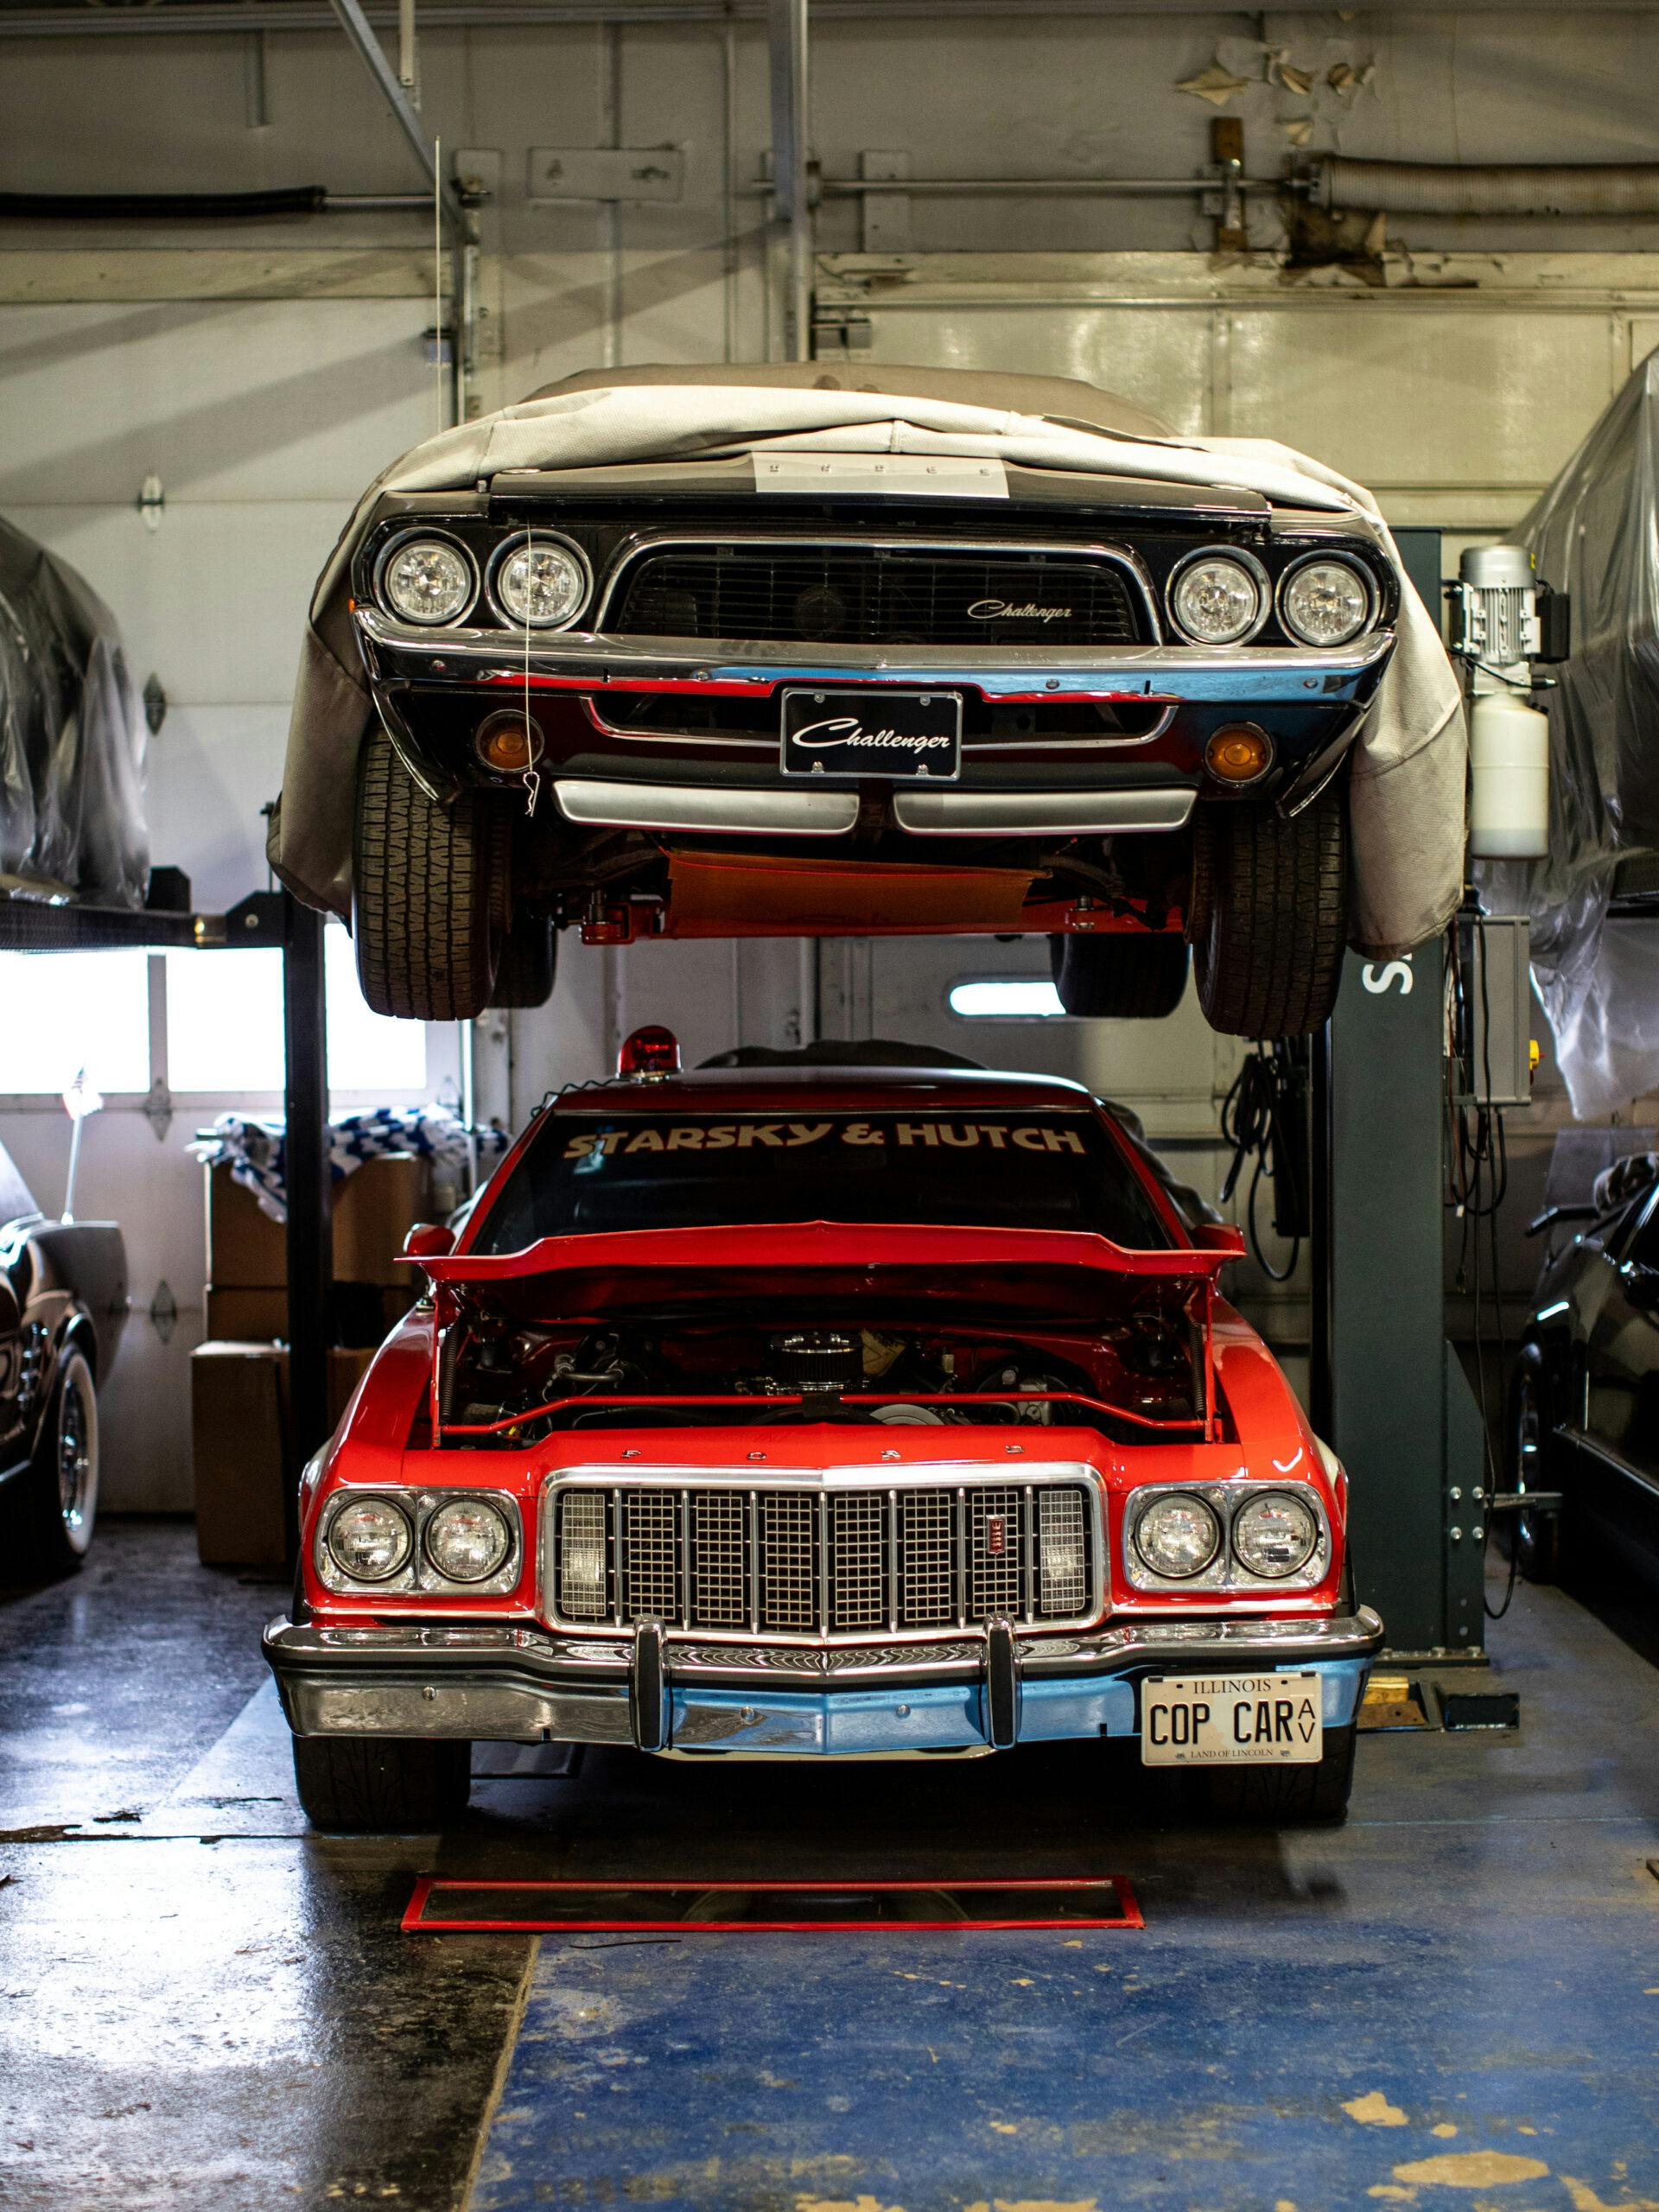 Mustang Brothers Restoration shop lifts